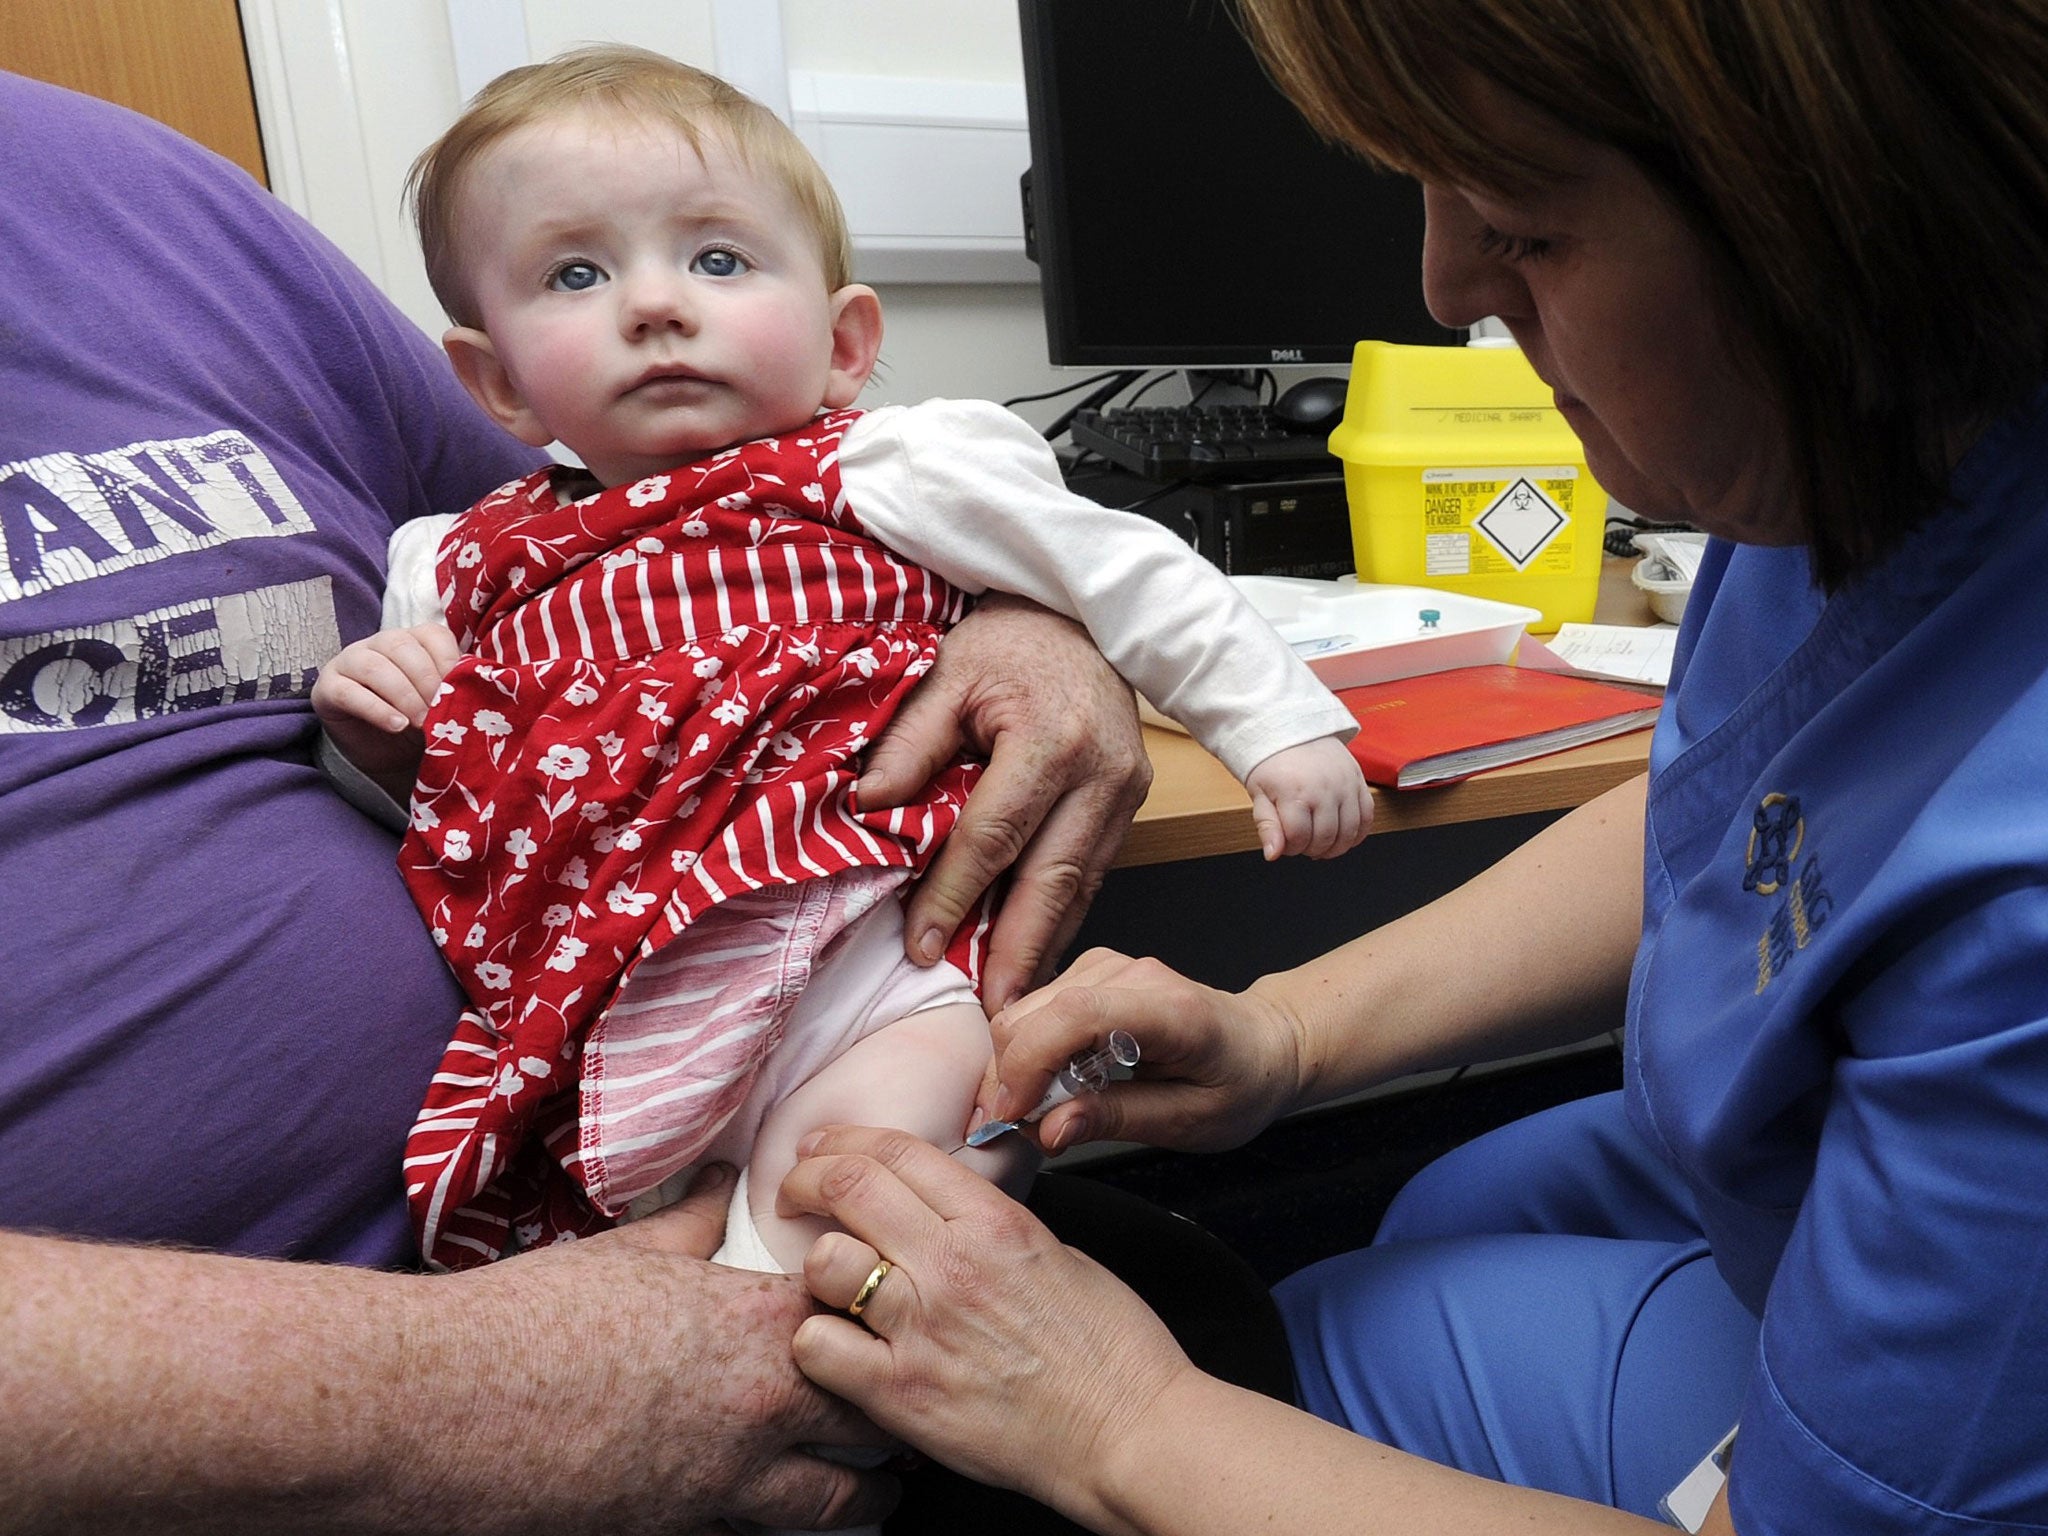 Fears over vaccine safety resulted in a measles outbreak in Wales in 2013